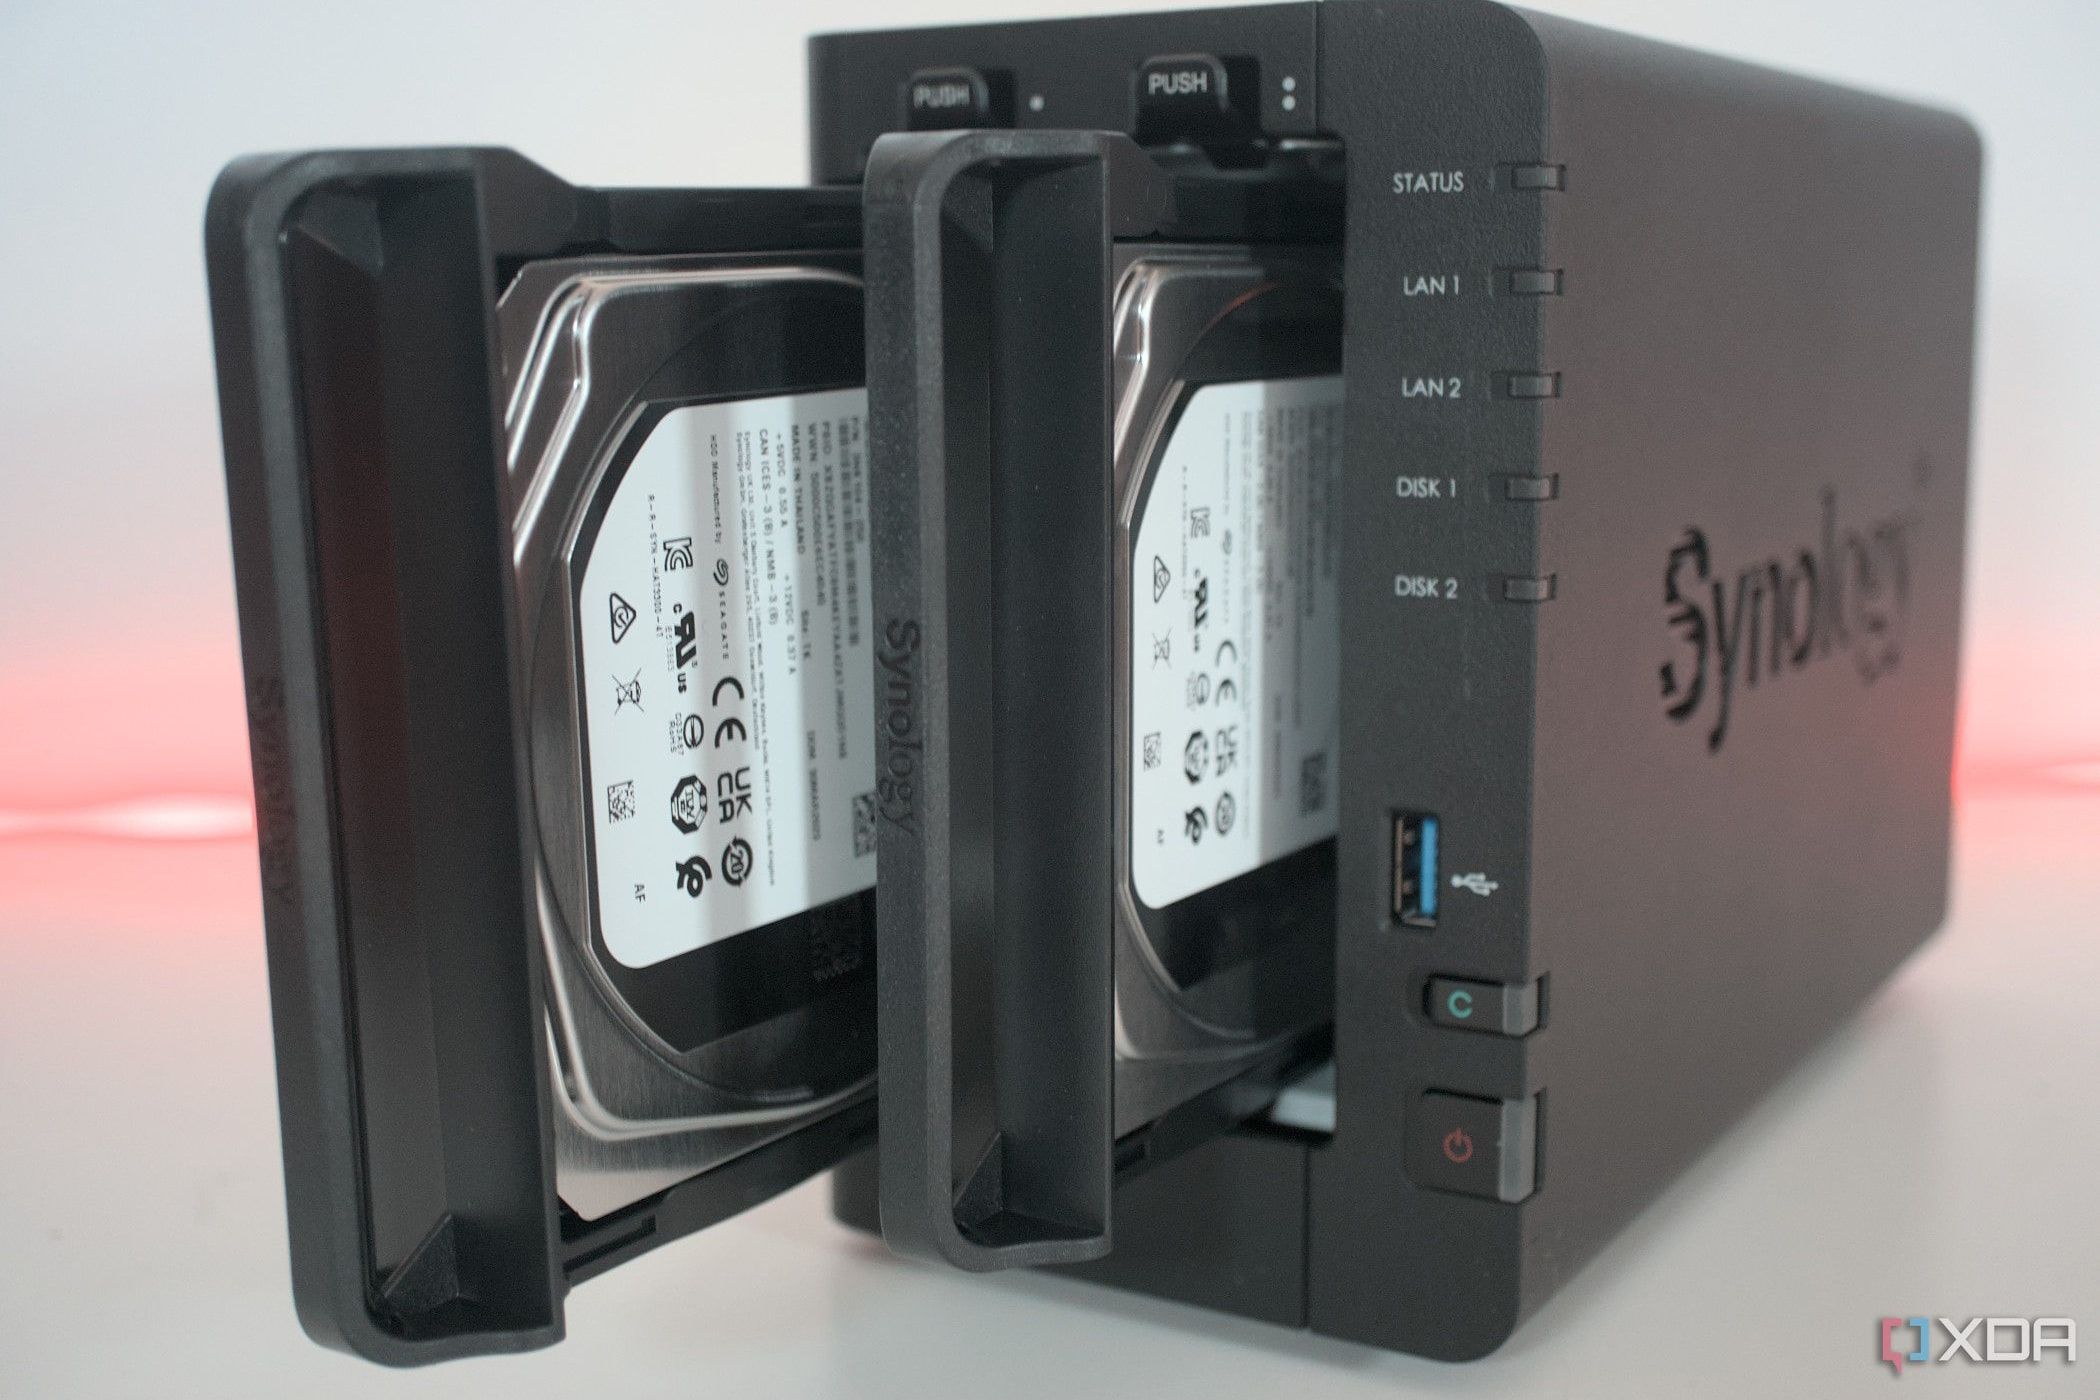 A Synology DiskStation D224+ NAS with two hard drives